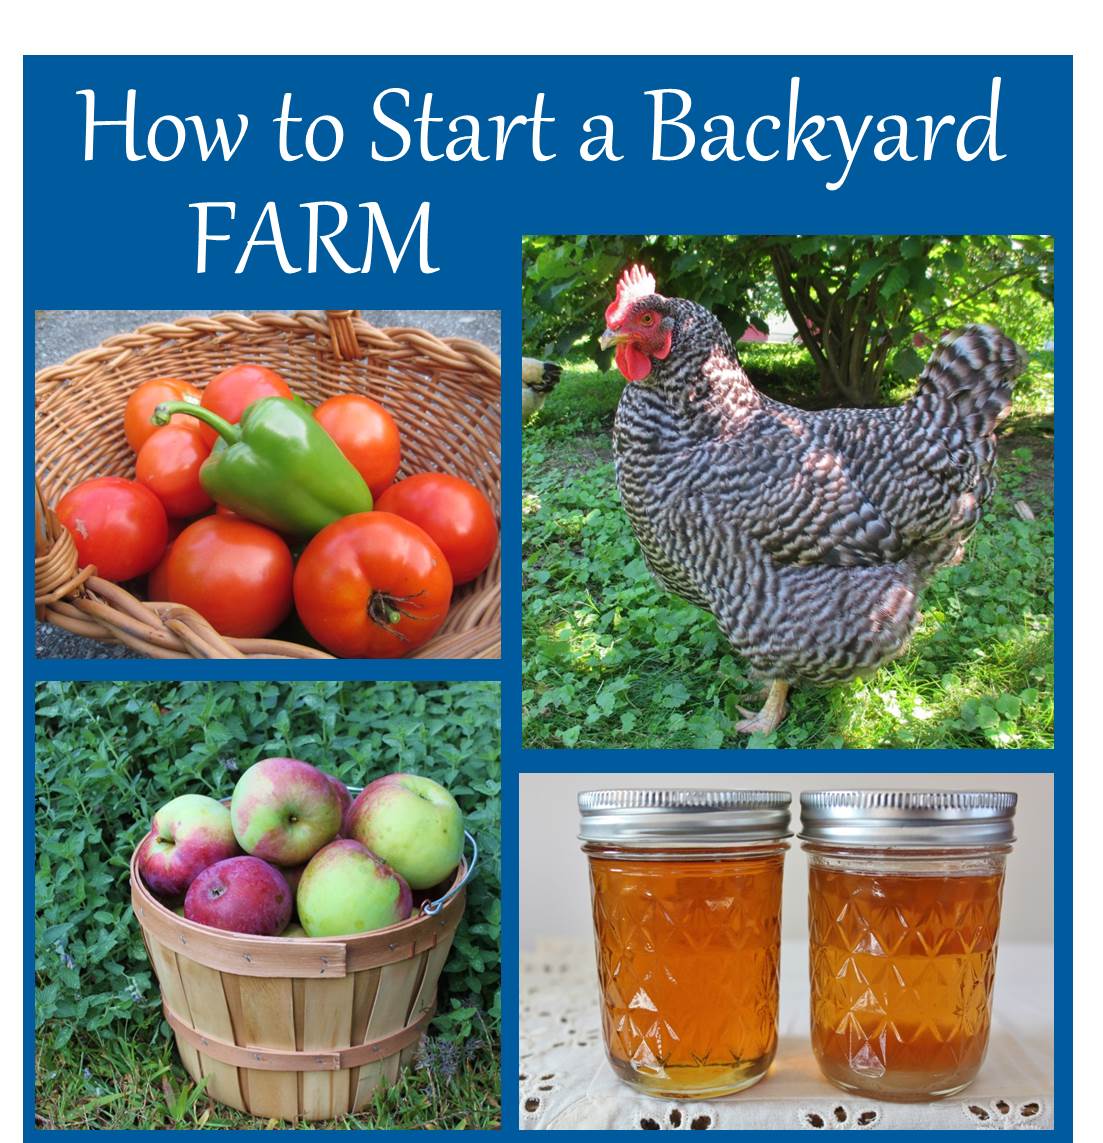 A photo that says "How to start a Backyard Farm", and has tomatoes in a basket, a chicken, honey in jars, and apples in a barrel all in a clockwise rotation. 